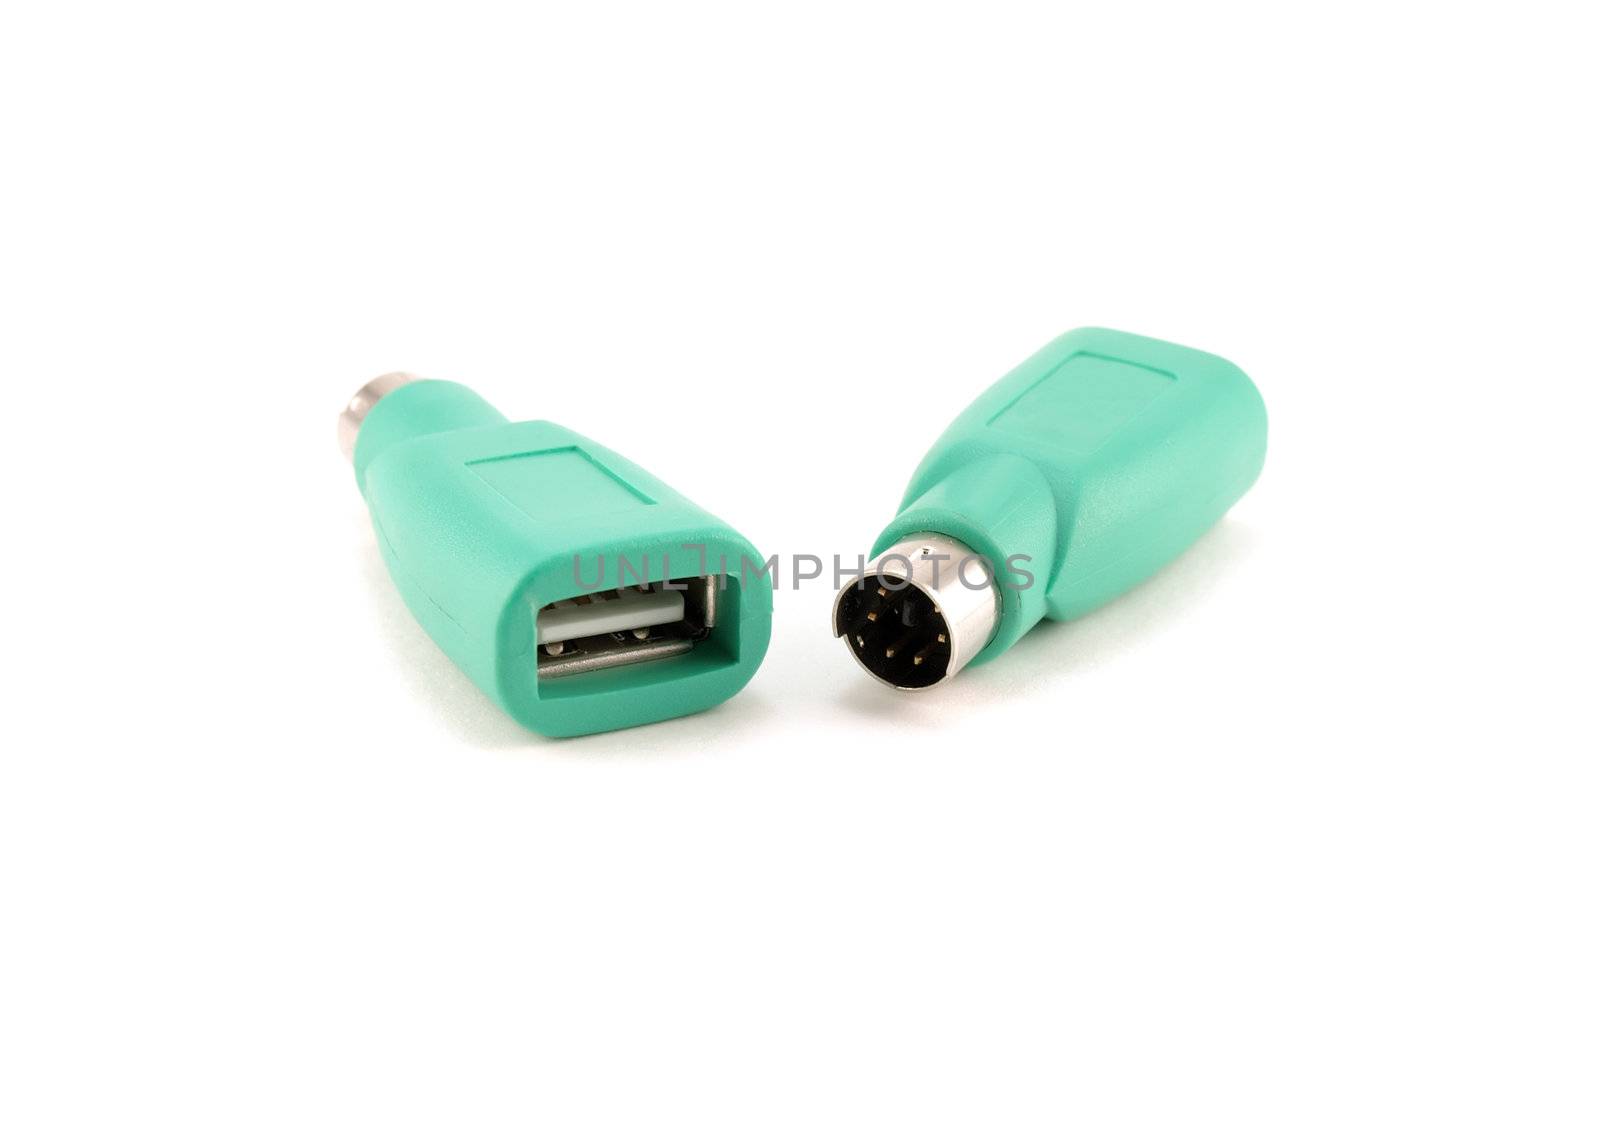 Adapters PS2 to USB by sergpet